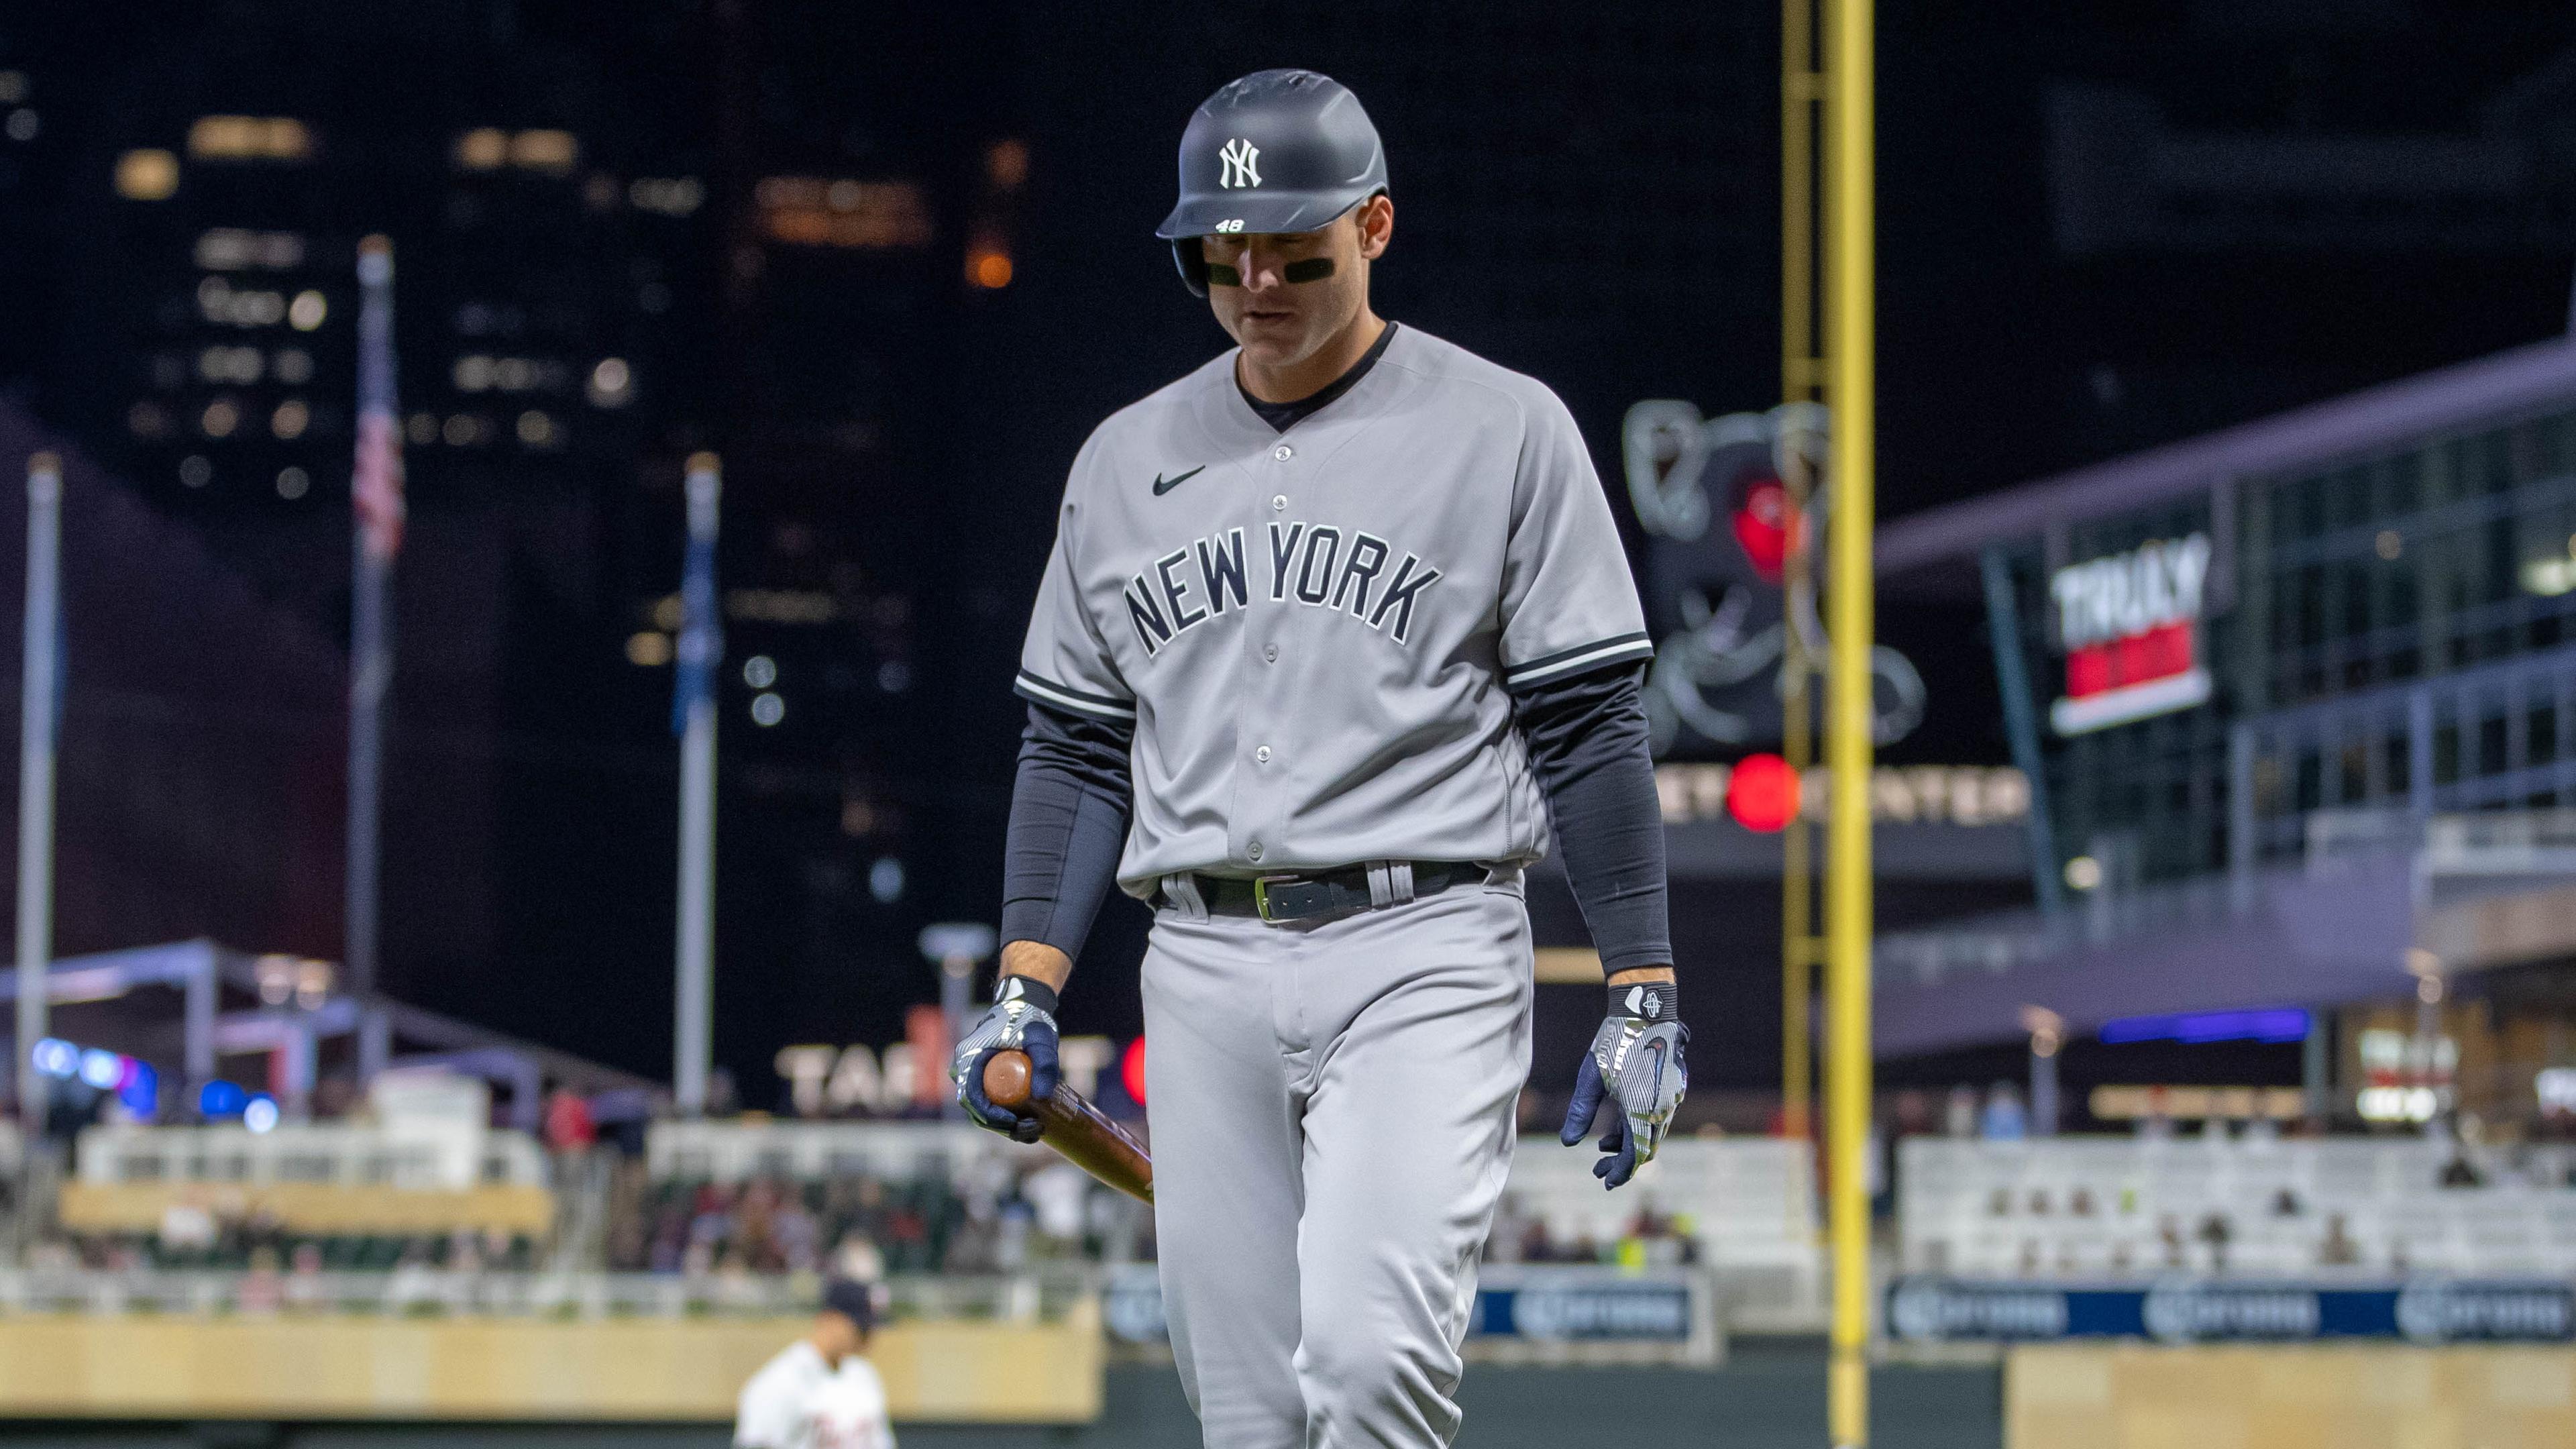 New York Yankees first baseman Anthony Rizzo (48) walks back to the dugout after striking out during the eighth inning against the Minnesota Twins at Target Field / Jesse Johnson - USA TODAY Sports